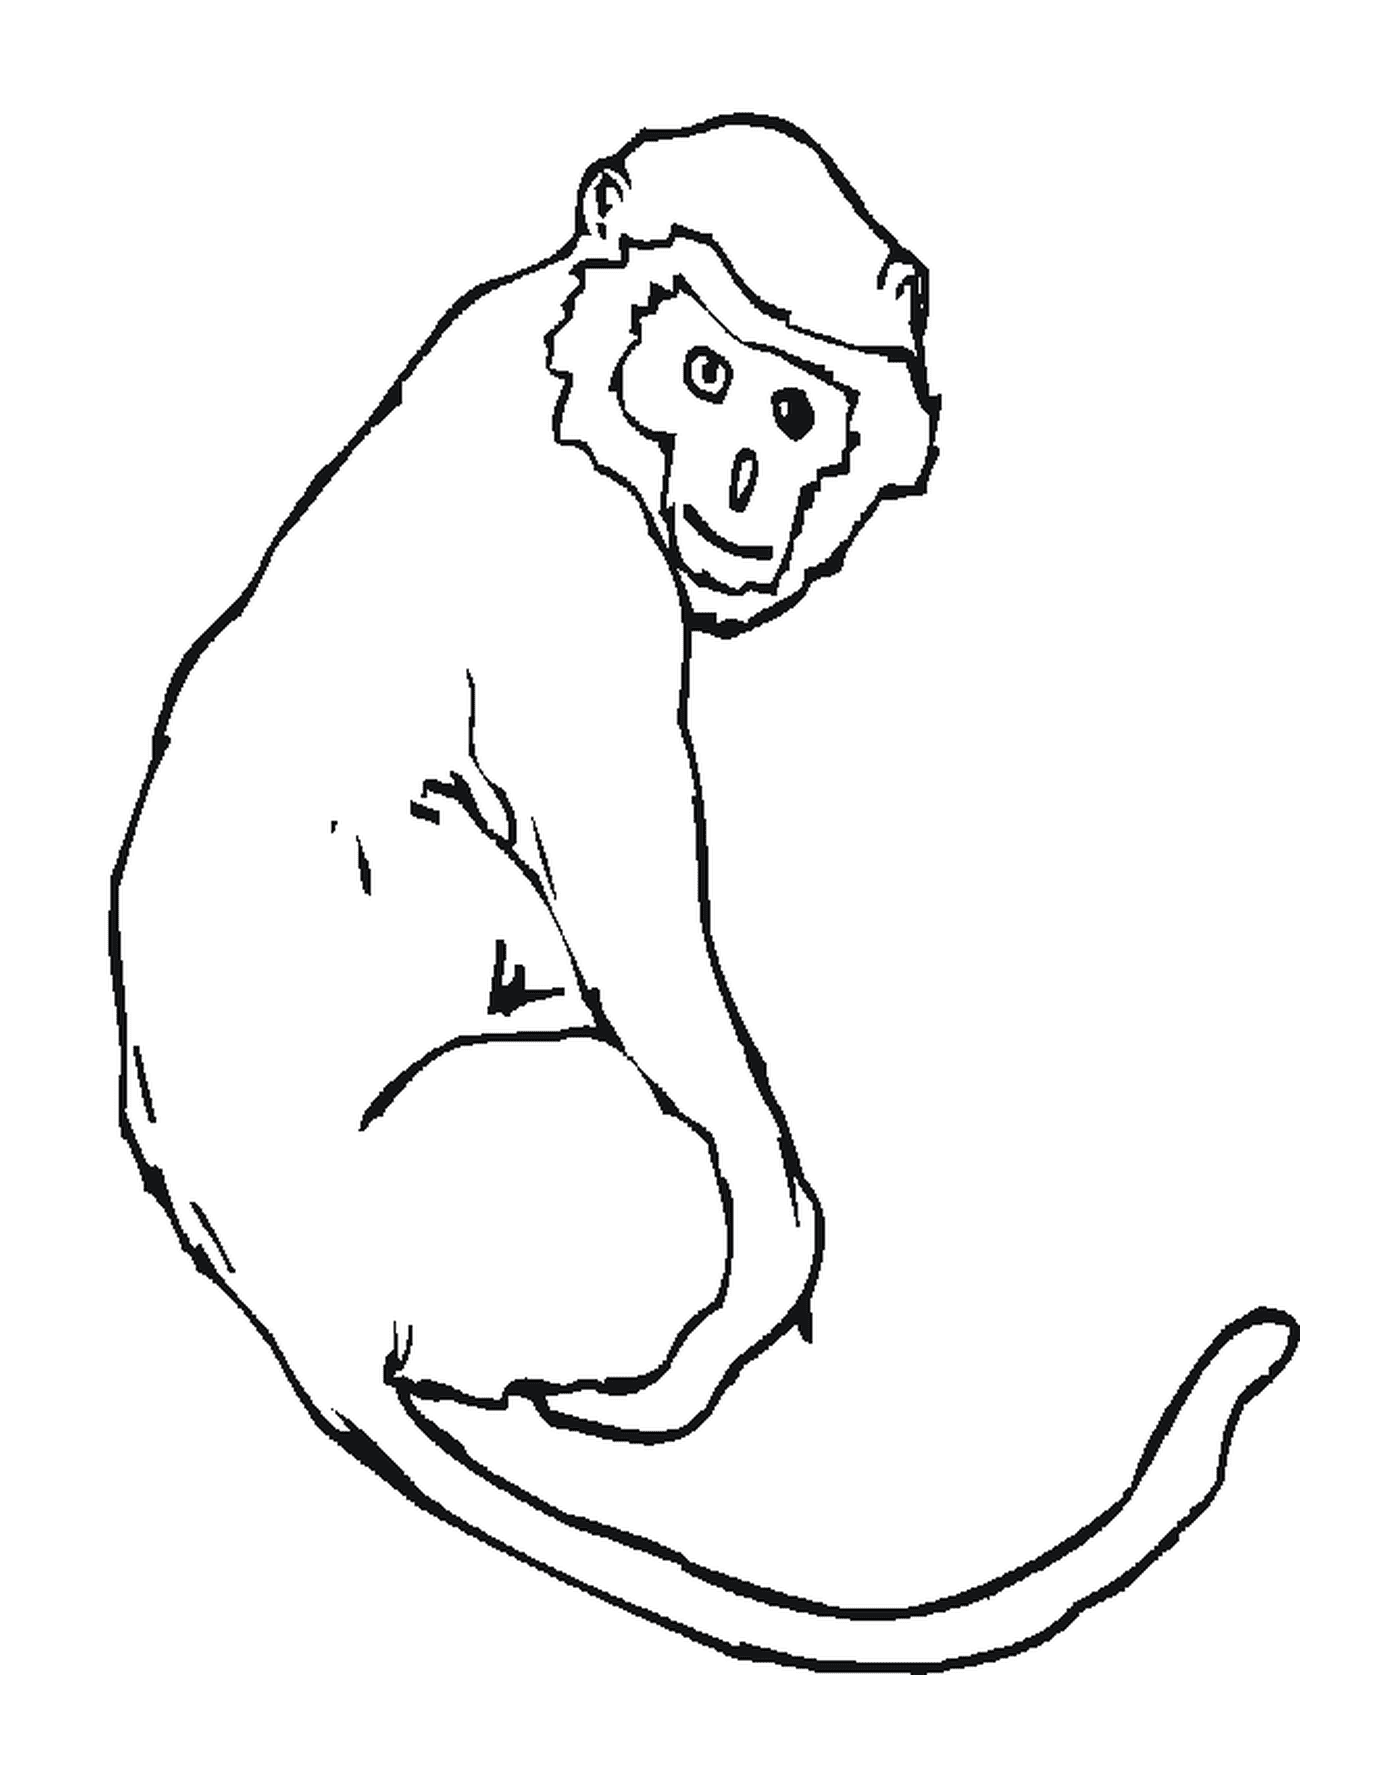  Monkey with a long tail 